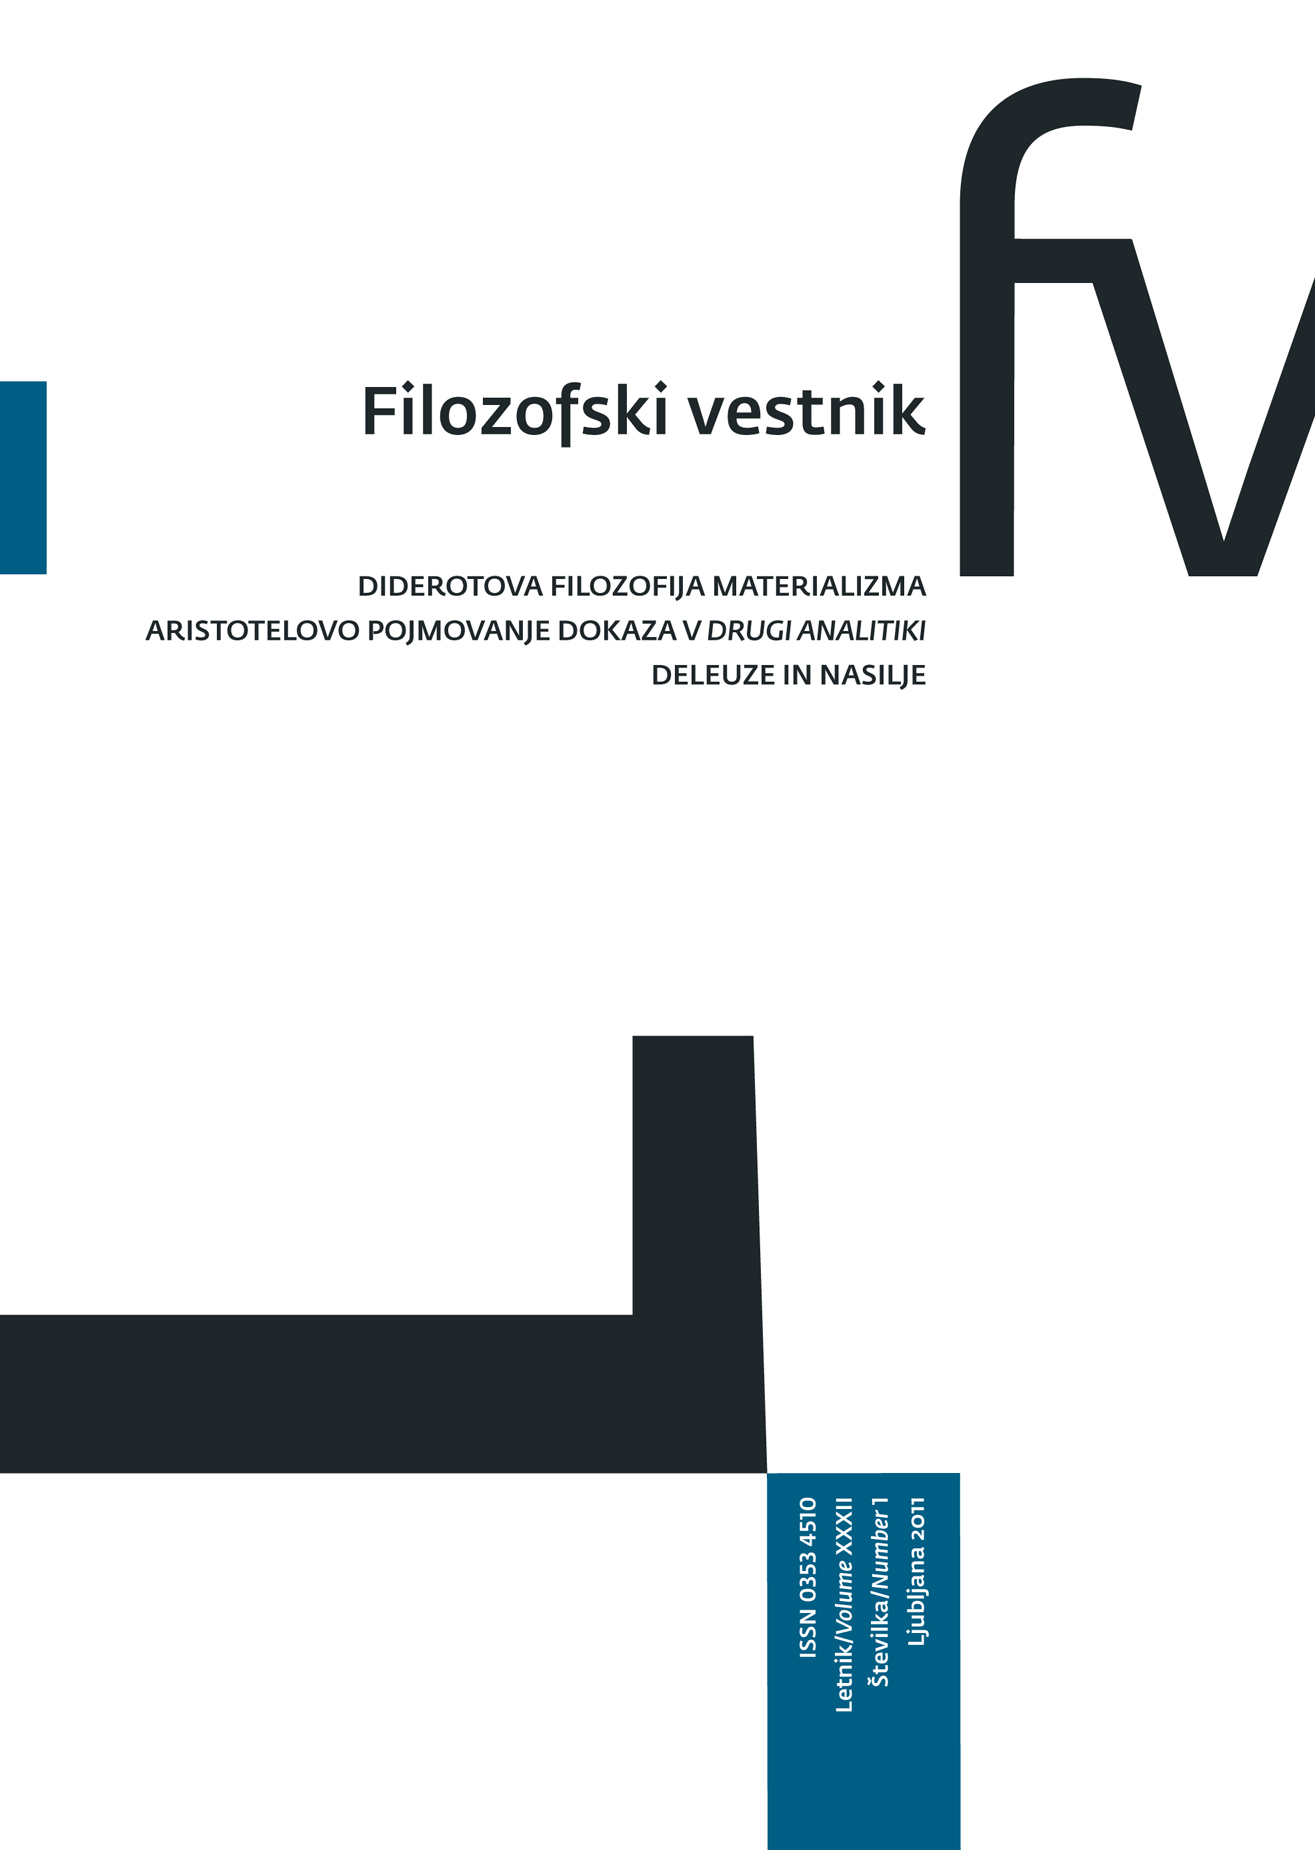 					View Vol. 32 No. 1 (2011): Diderot's Philosophy of Materialism, Aristotle's Theory of Demonstration in Posterior Analytics, Deleuze and Violence
				